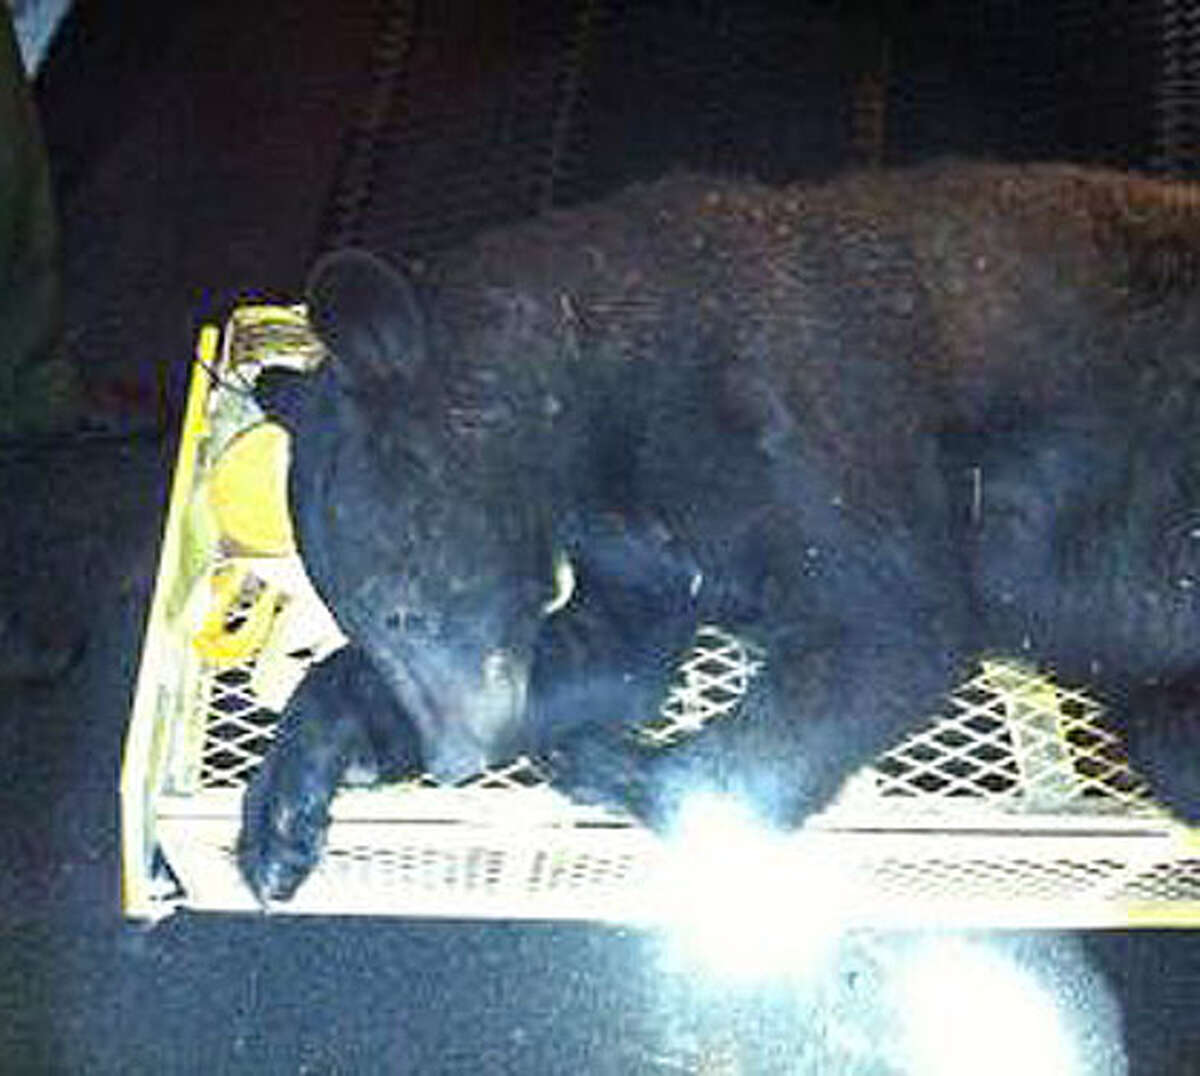 A 175-pound, two-year-old male bear was tranquilized in the city of Albany by DEC Environmental Conservation Officers on Tuesday, May 1, 2012. The bear fell approximately 50 feet out of a tree in the vicinity of South Pearl Street and Interstate 787. (New York State Department of Environmental Conservation)